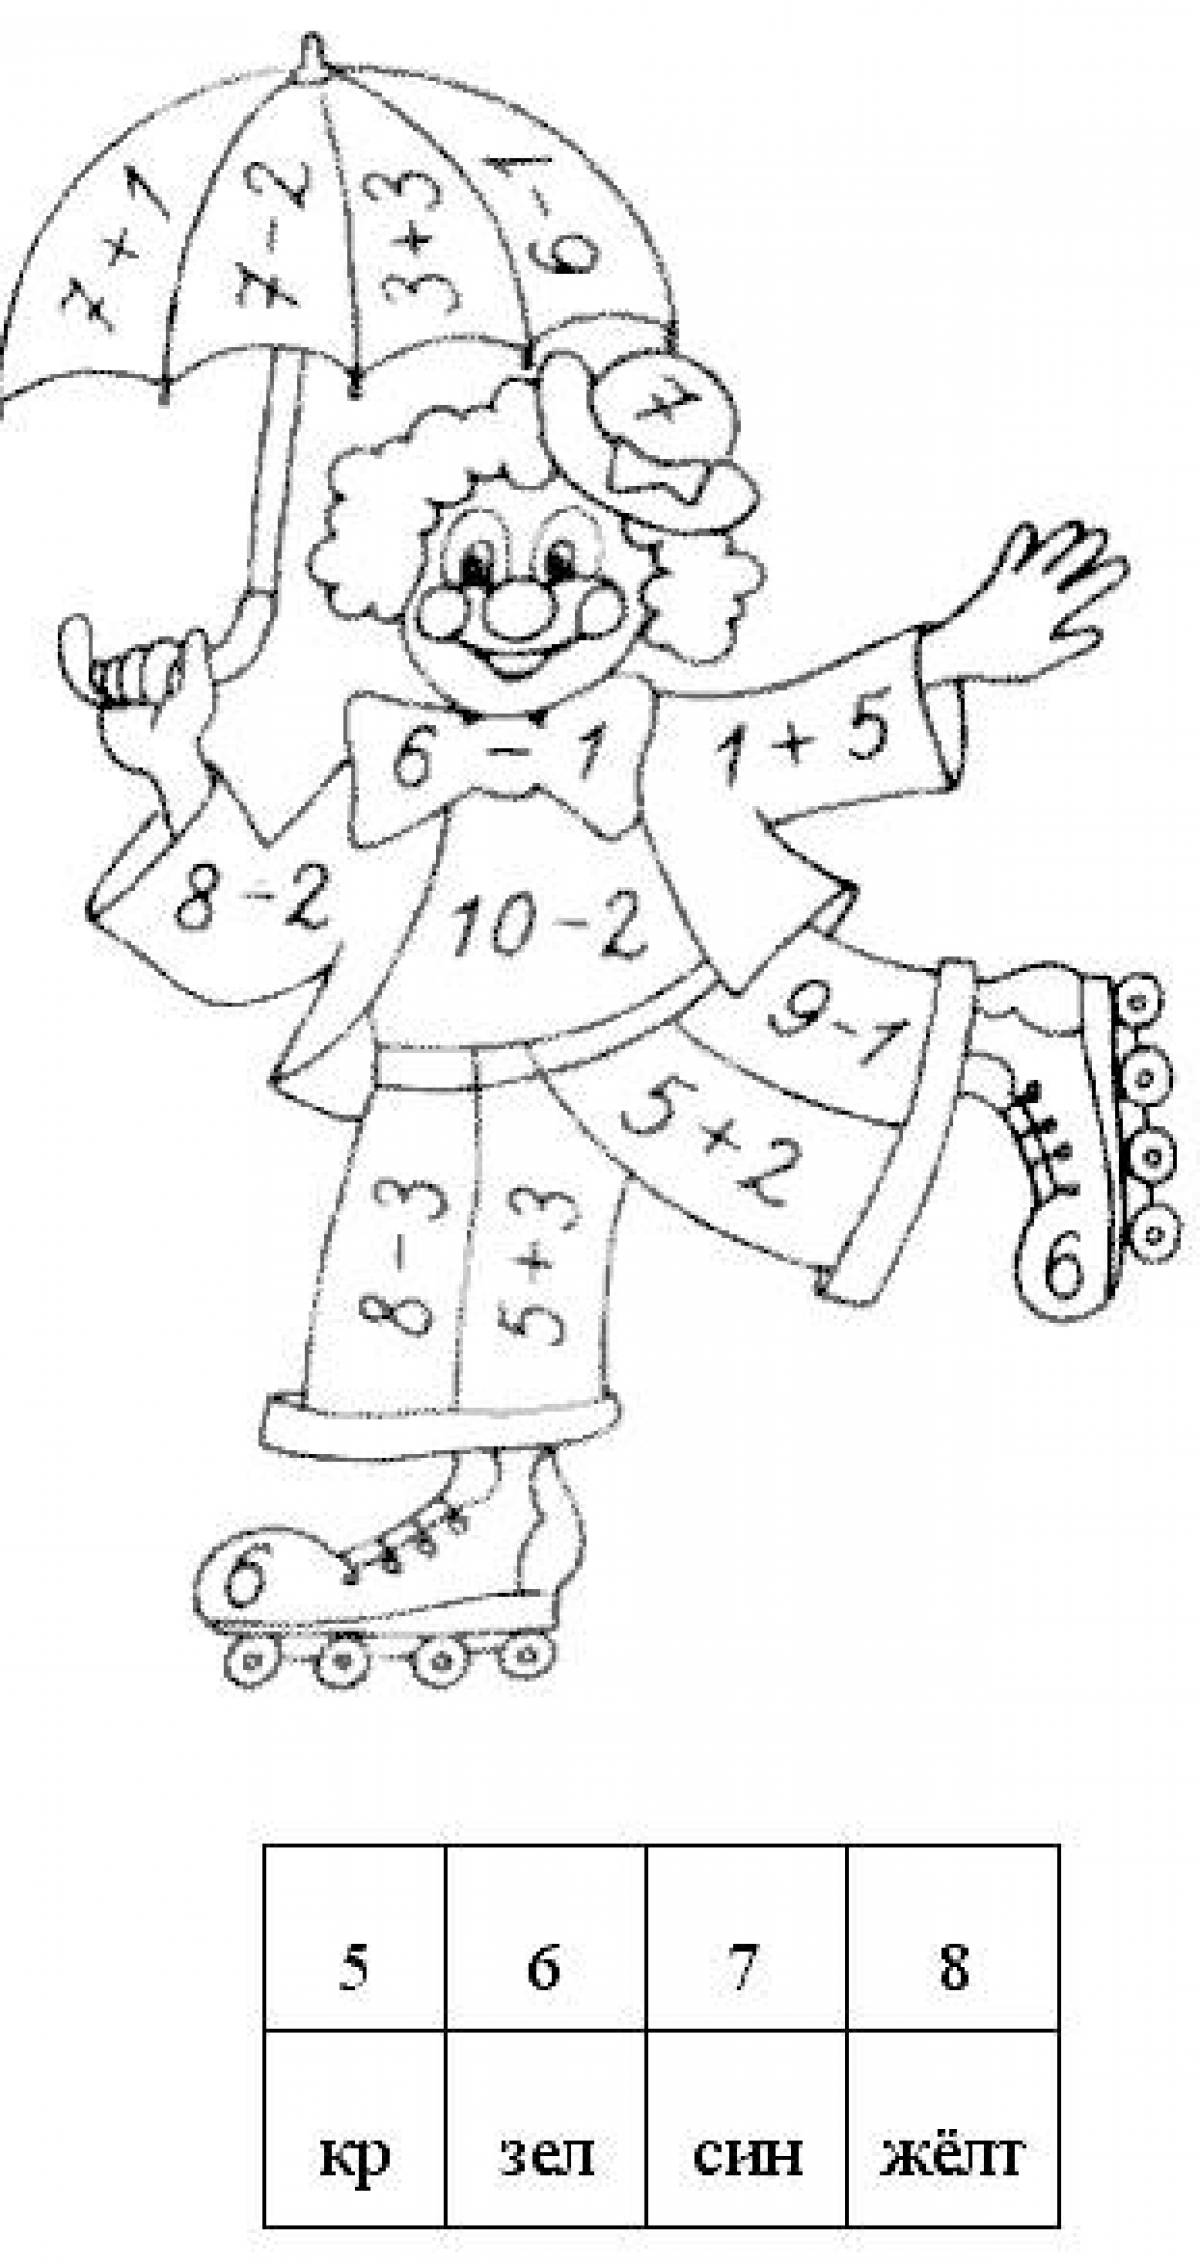 Coloring pages for 1st grade with examples of a clown